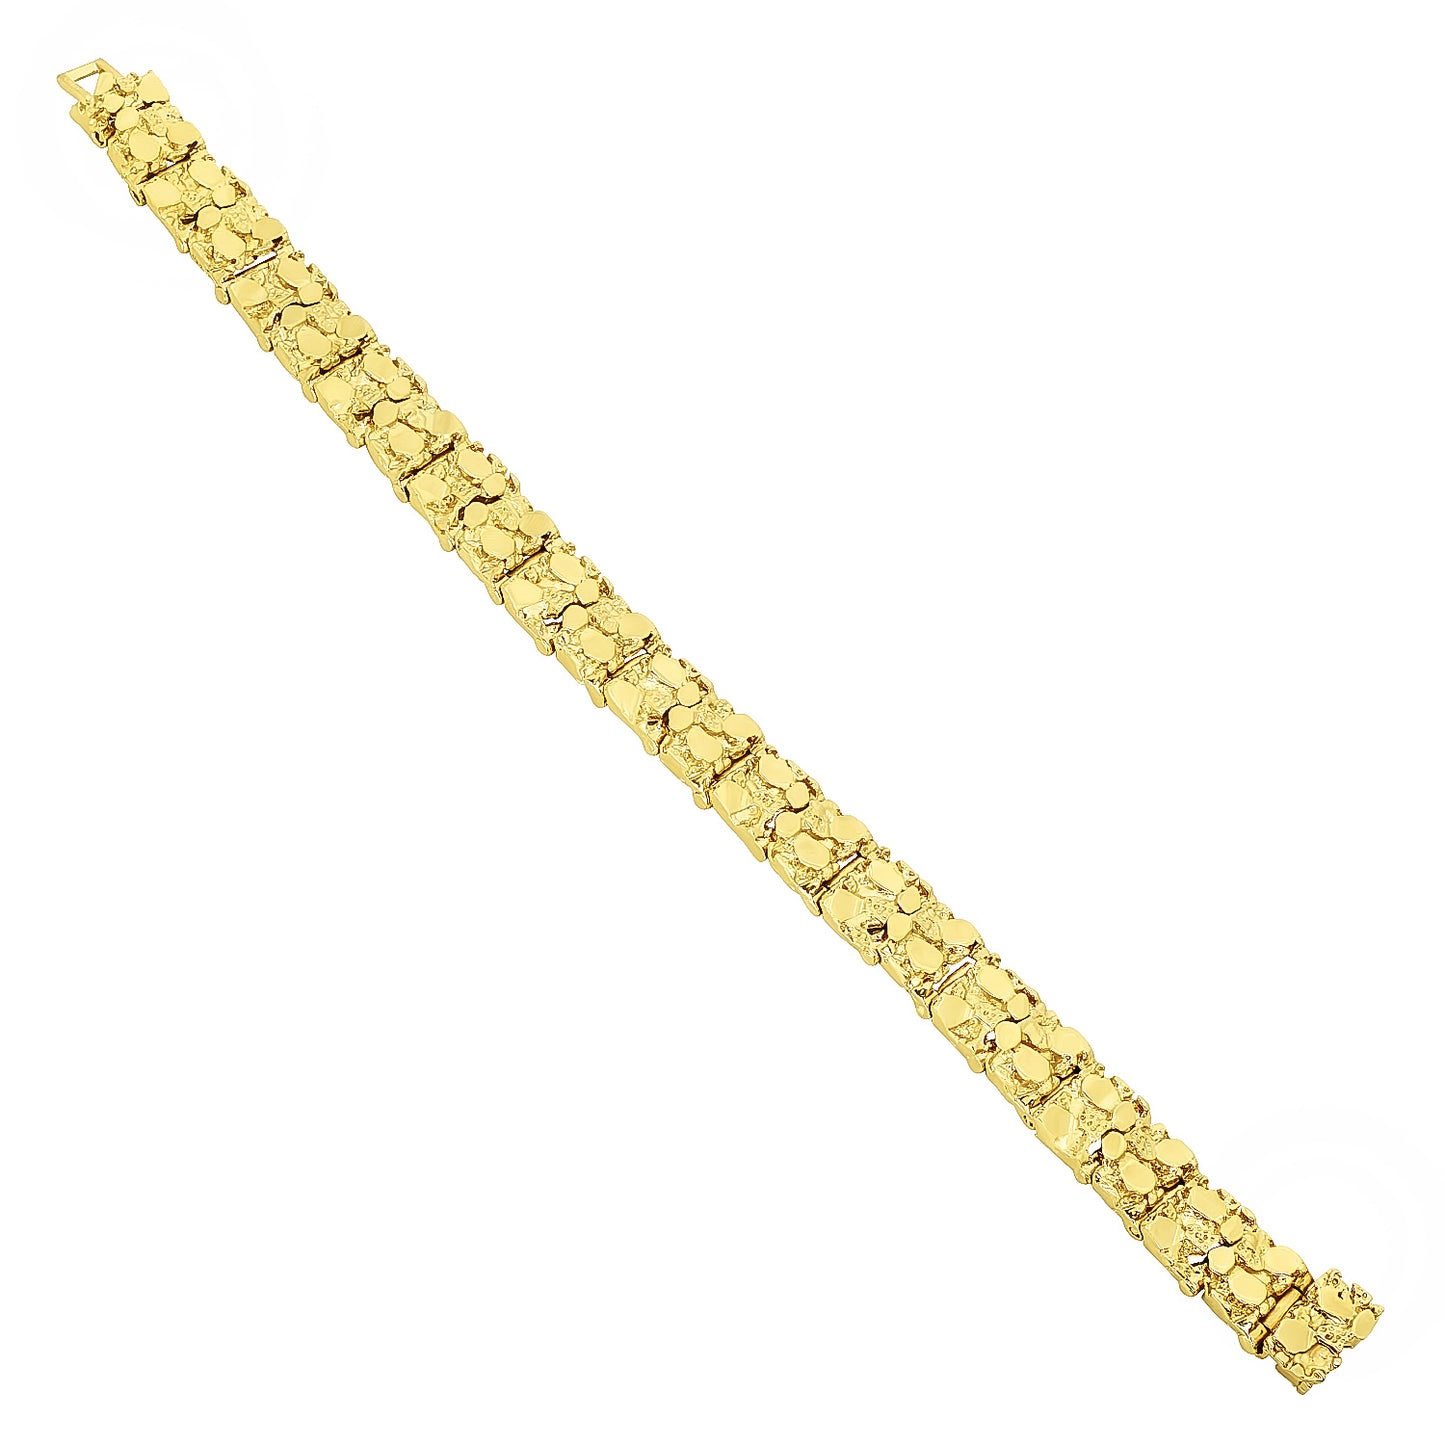 Thick 12.5mm 14k Gold Plated Chunky Nugget Textured Link Bracelet + Jewelry Polishing Cloth (SKU: GL-NGB4)